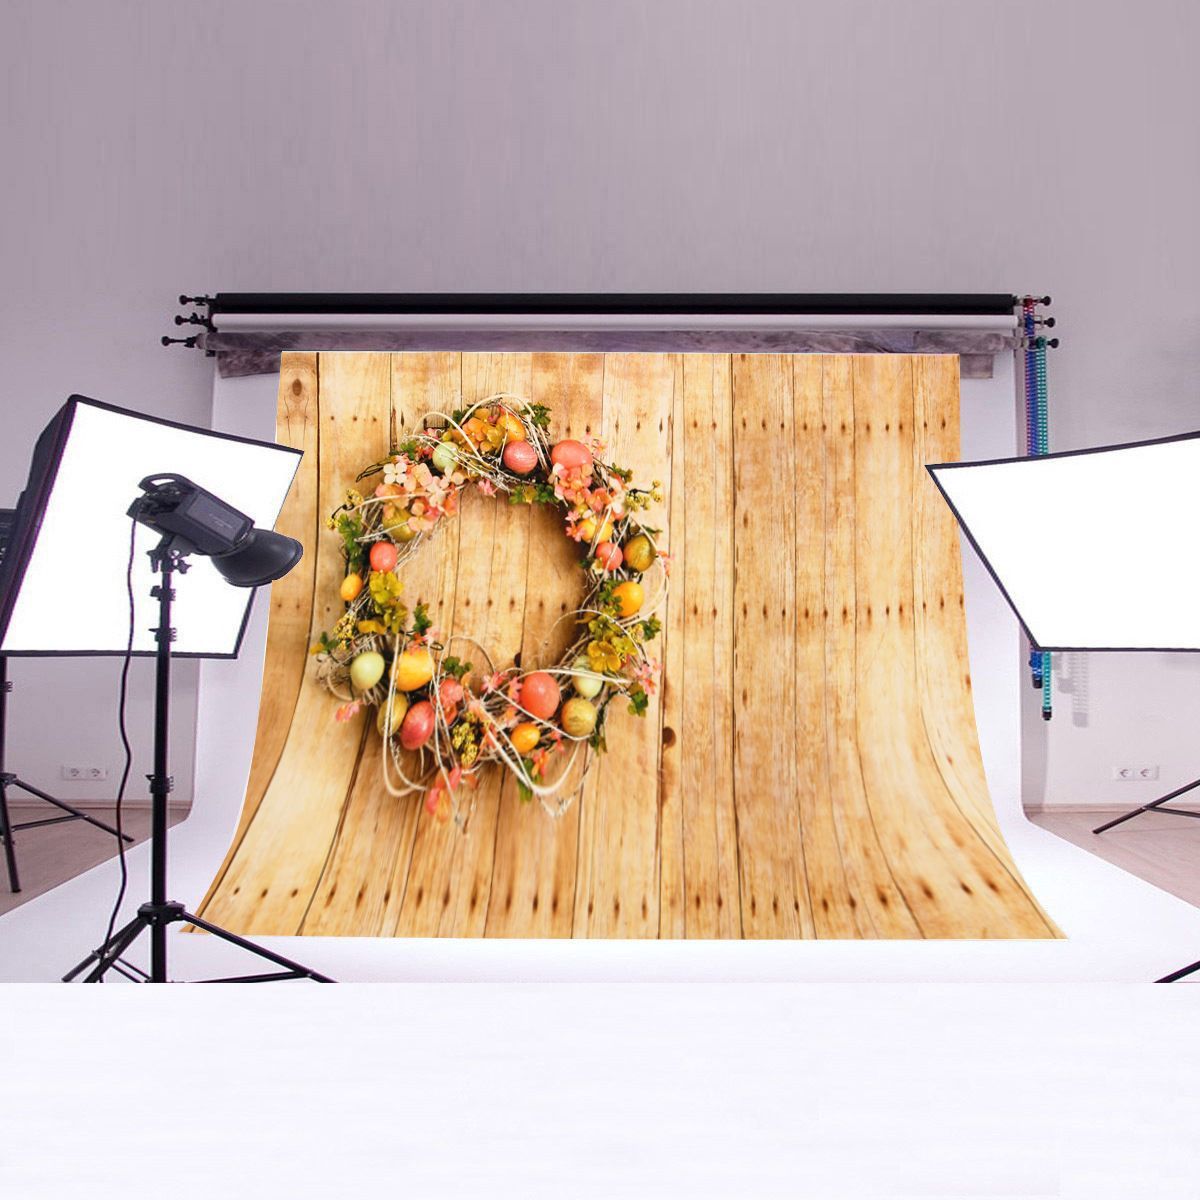 7x5ft5x3ft-Easter-Egg-Wood-Board-Thin-Vinyl-Photography-Backdrop-Background-Studio-Photo-Prop-1314802